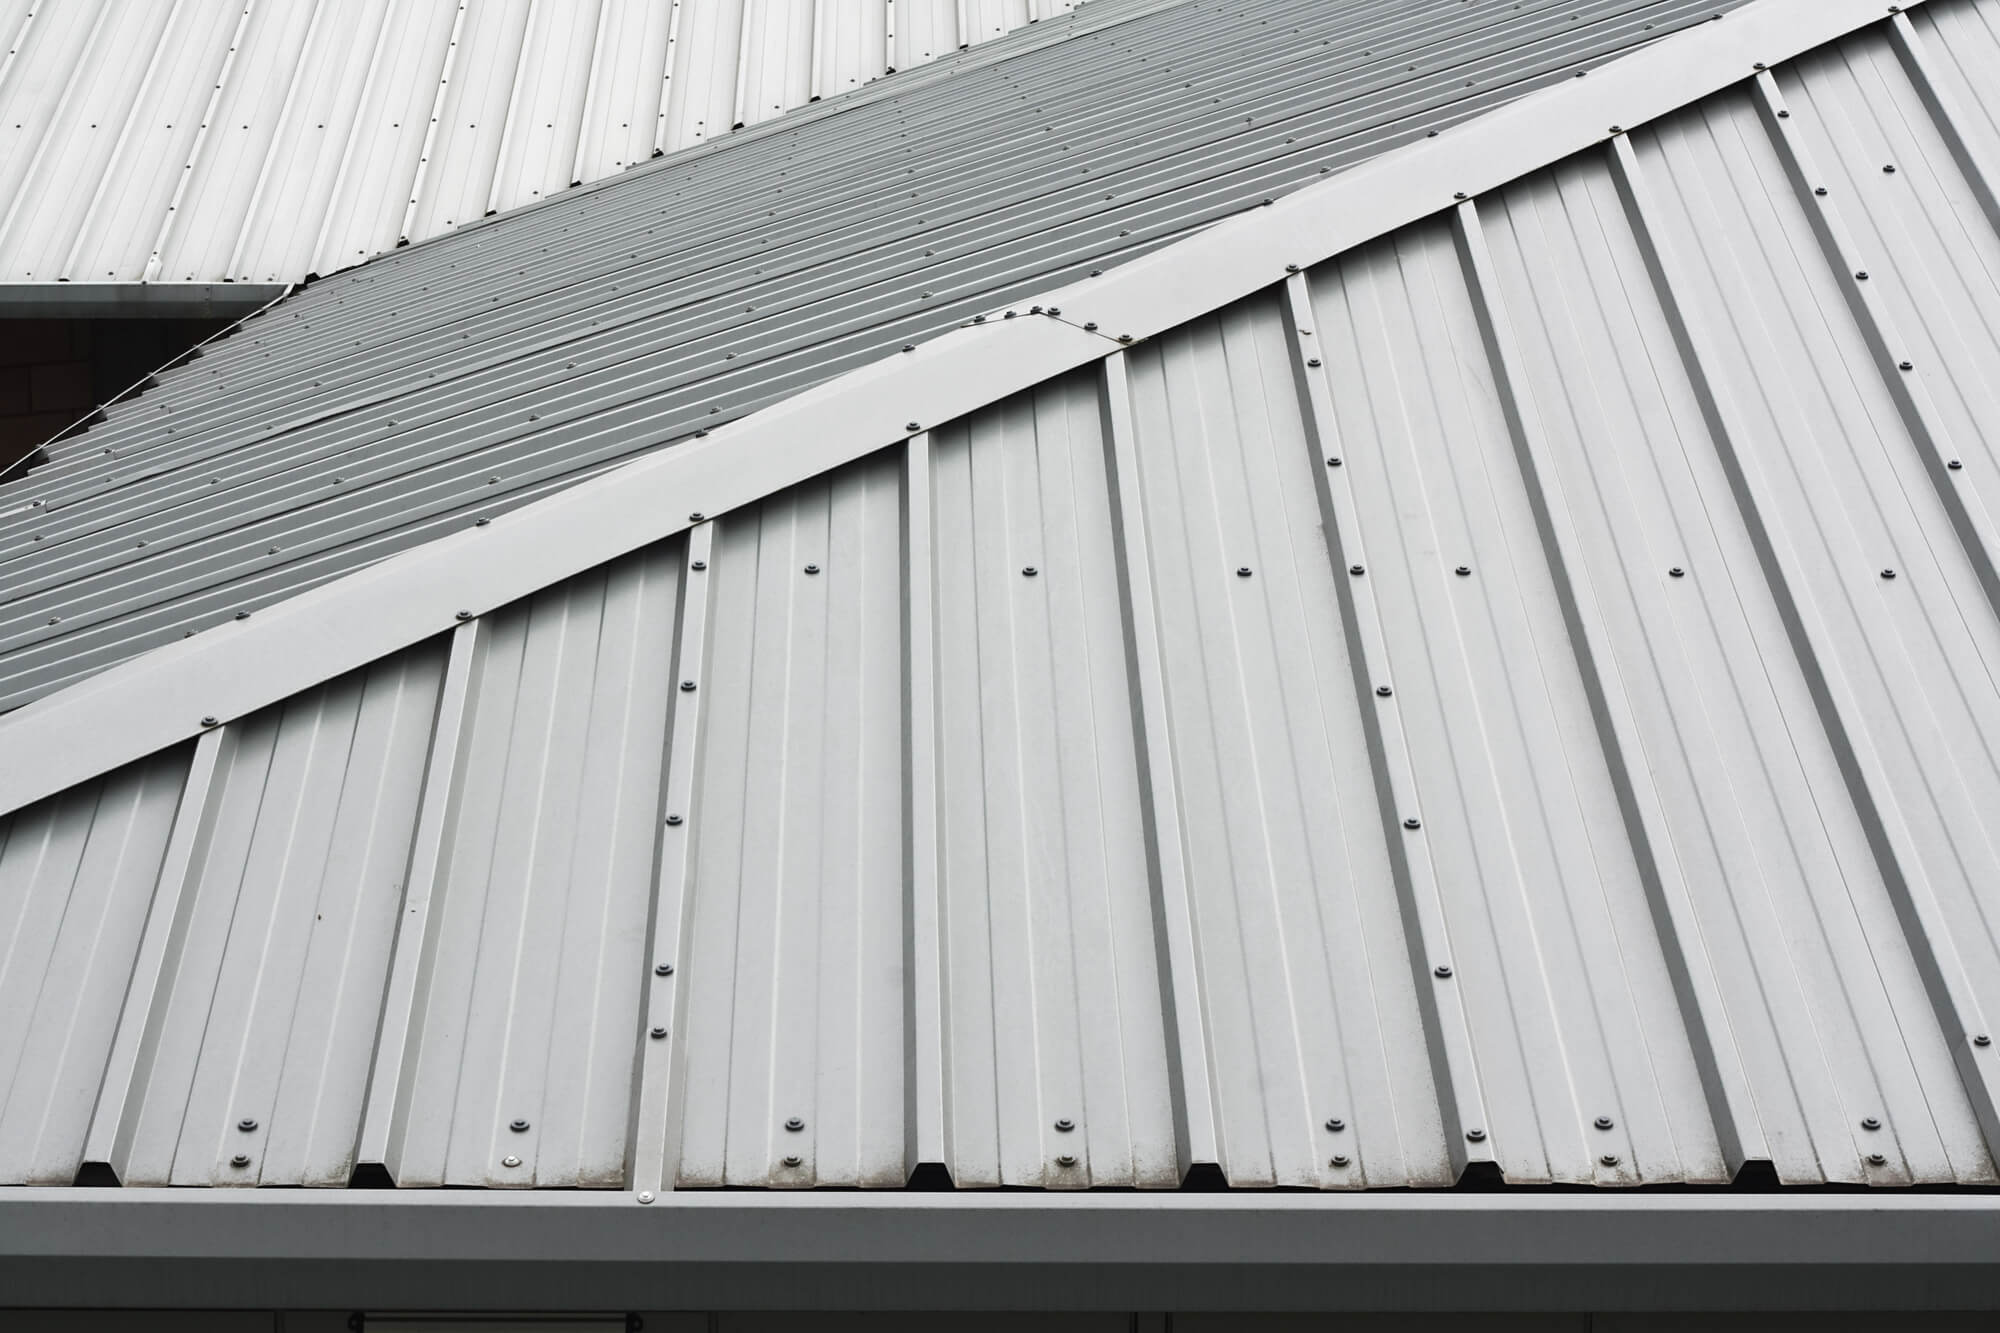 tilted commercial metal roofing system